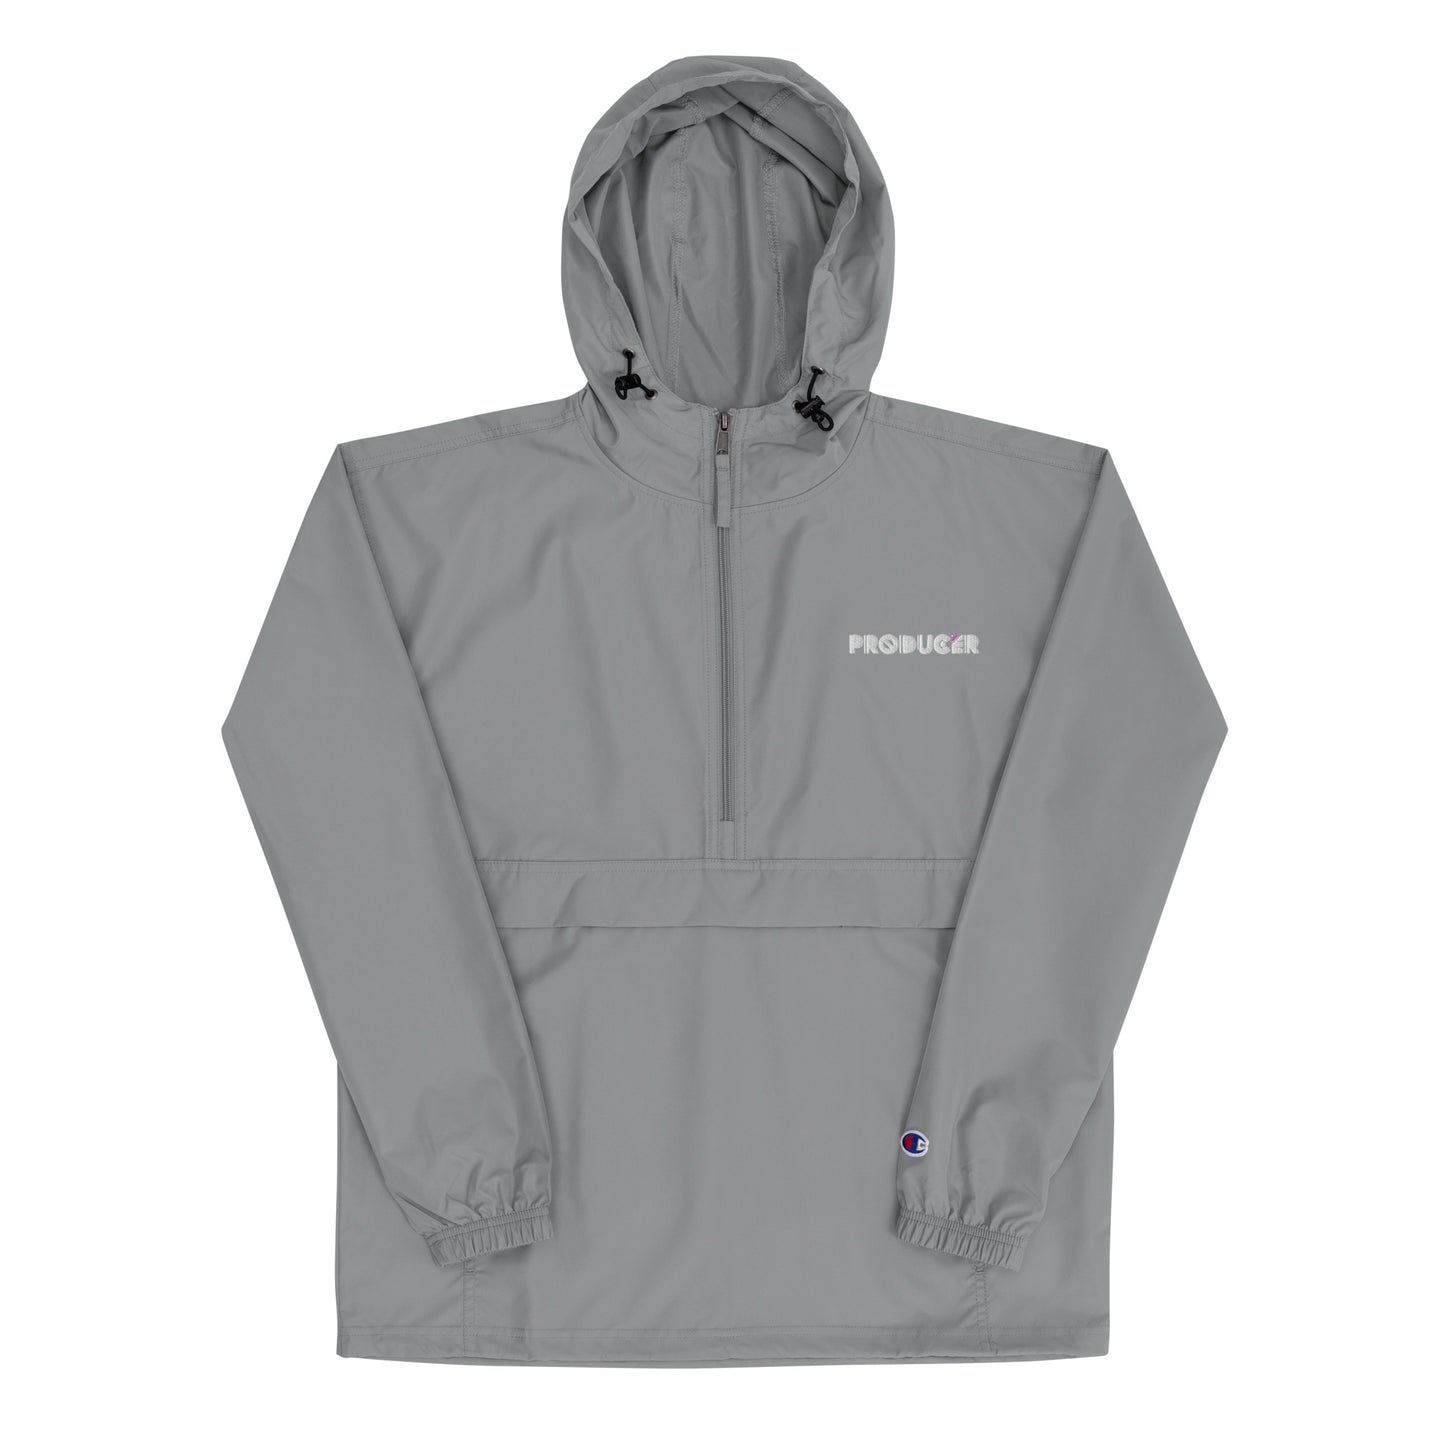 Producer Embroidered Champion Packable Jacket